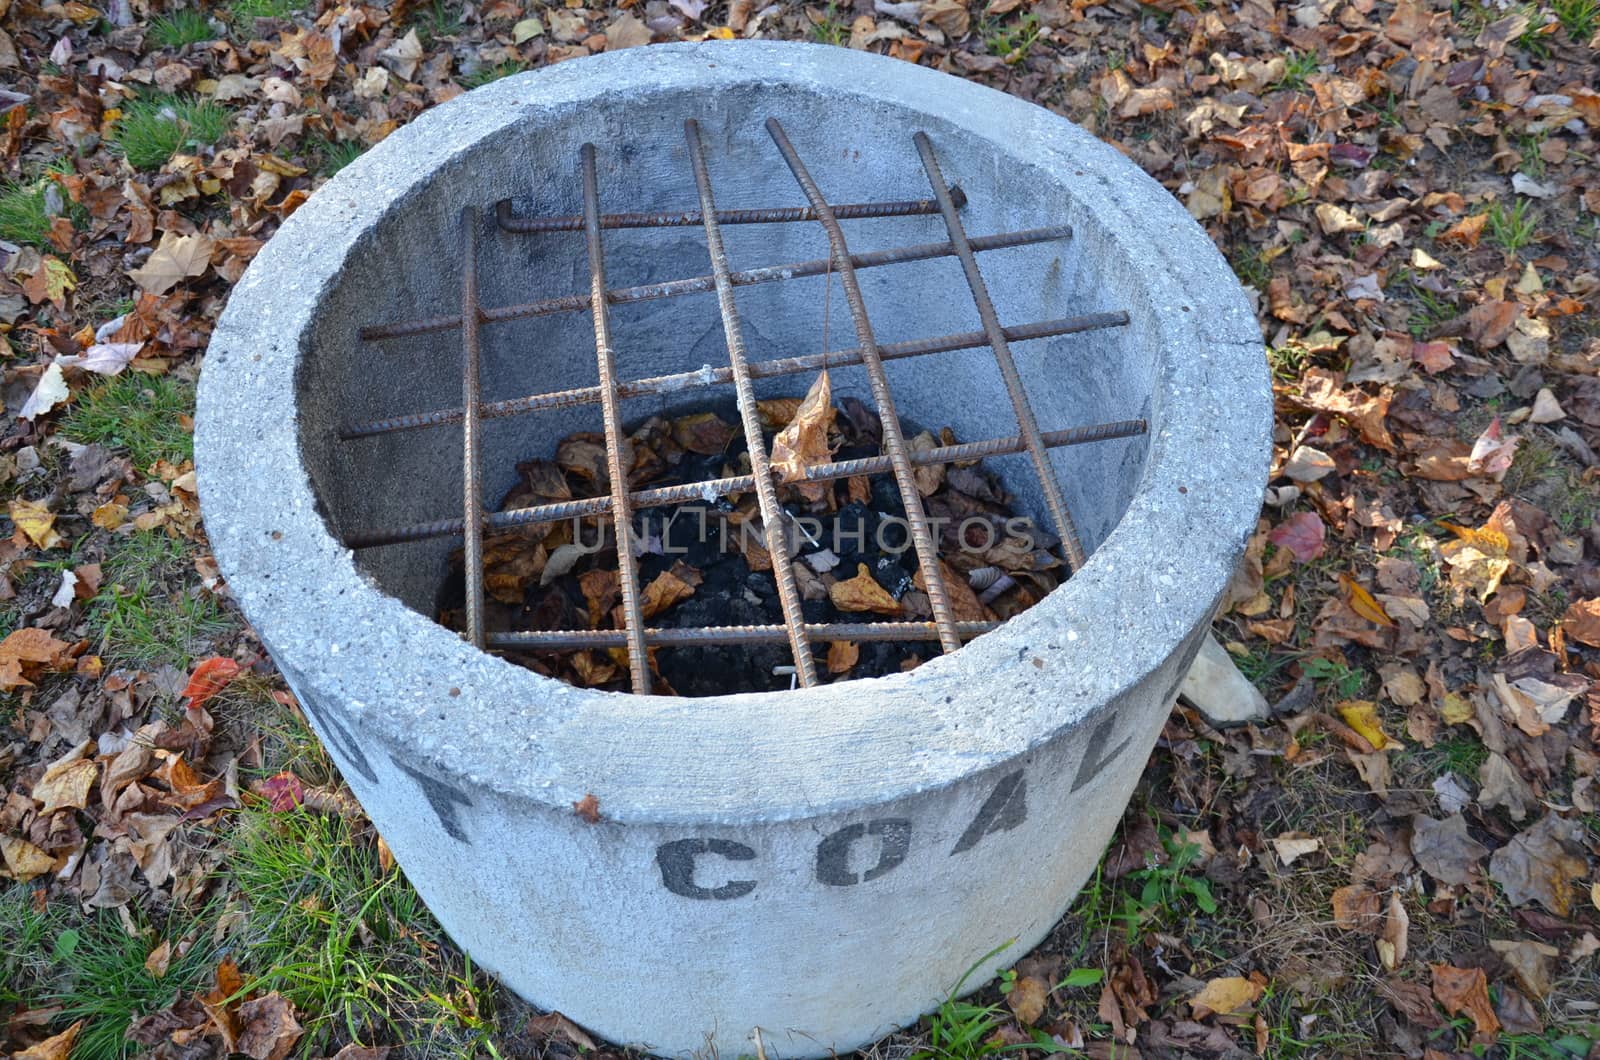 cement hot coal container or bin with metal bars and leaves